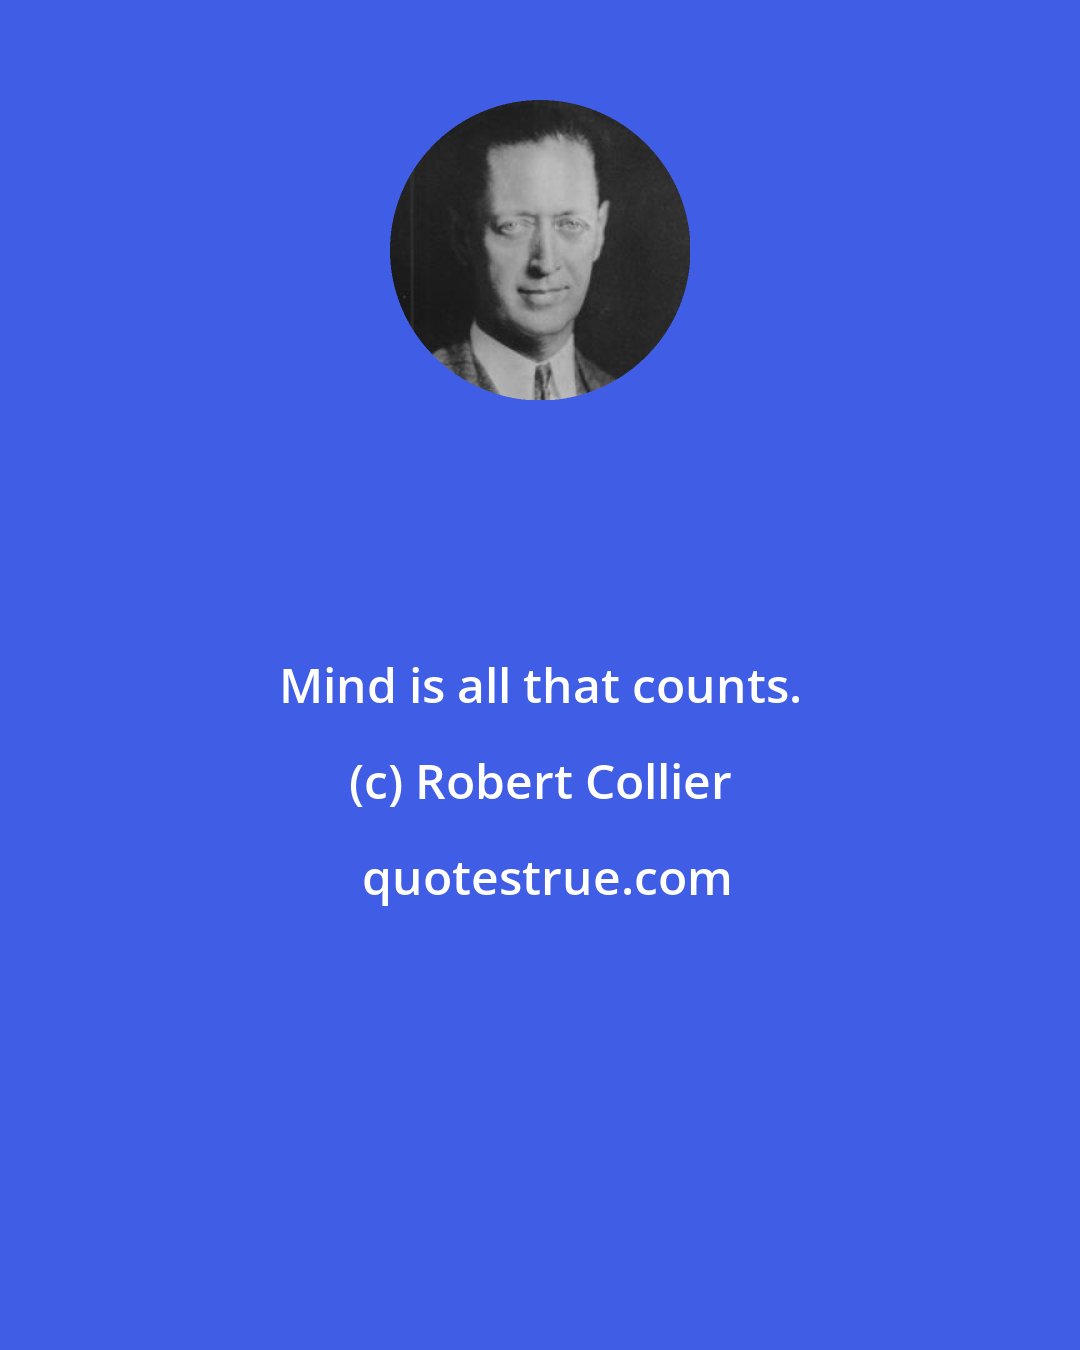 Robert Collier: Mind is all that counts.